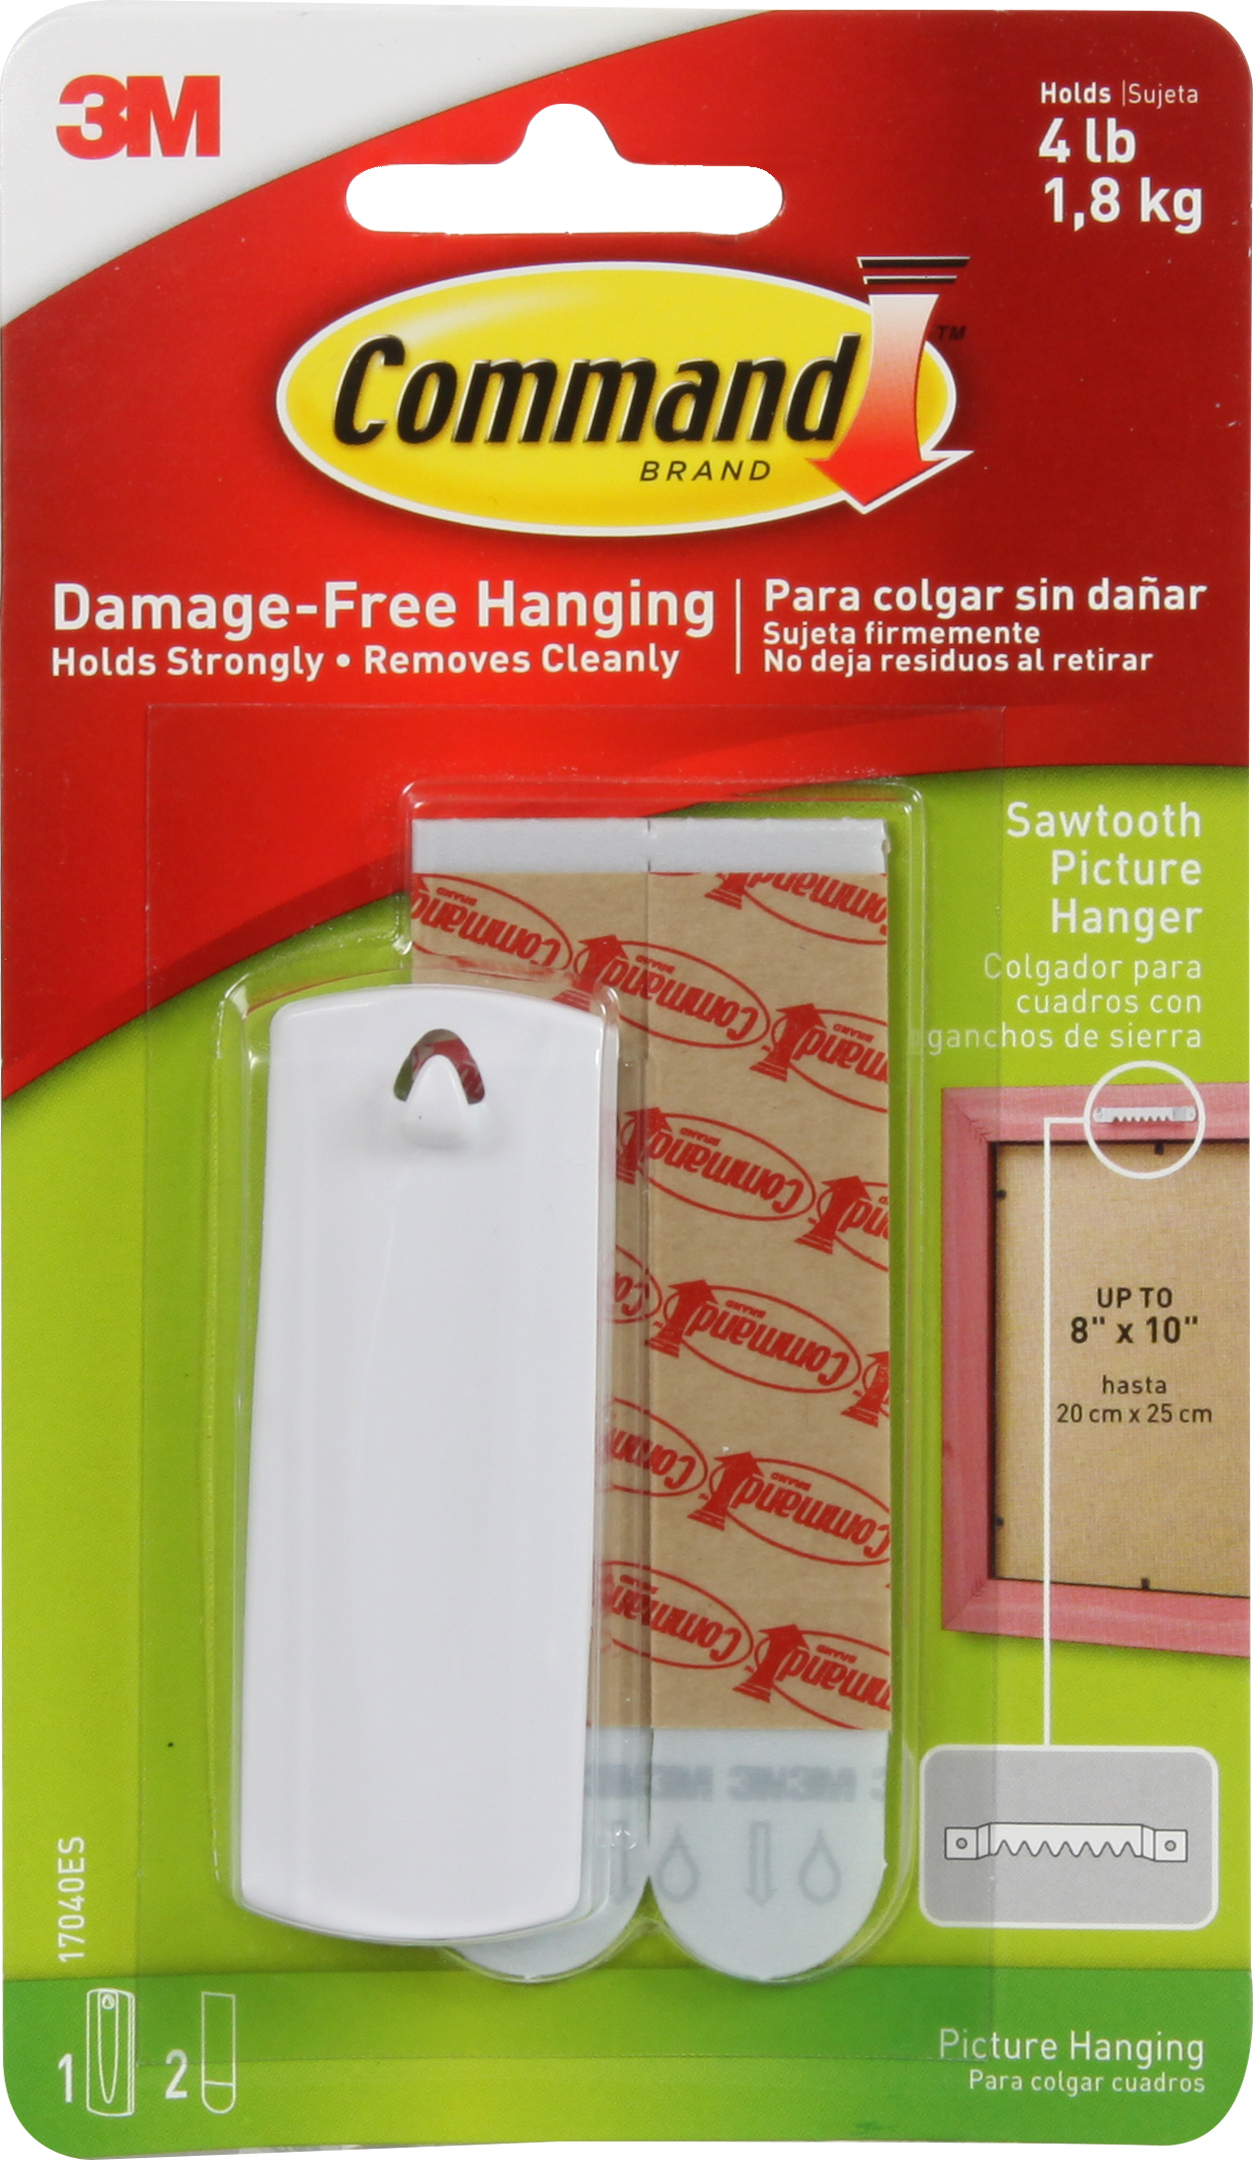 3M Command Sawtooth Picture Hanger (17040)